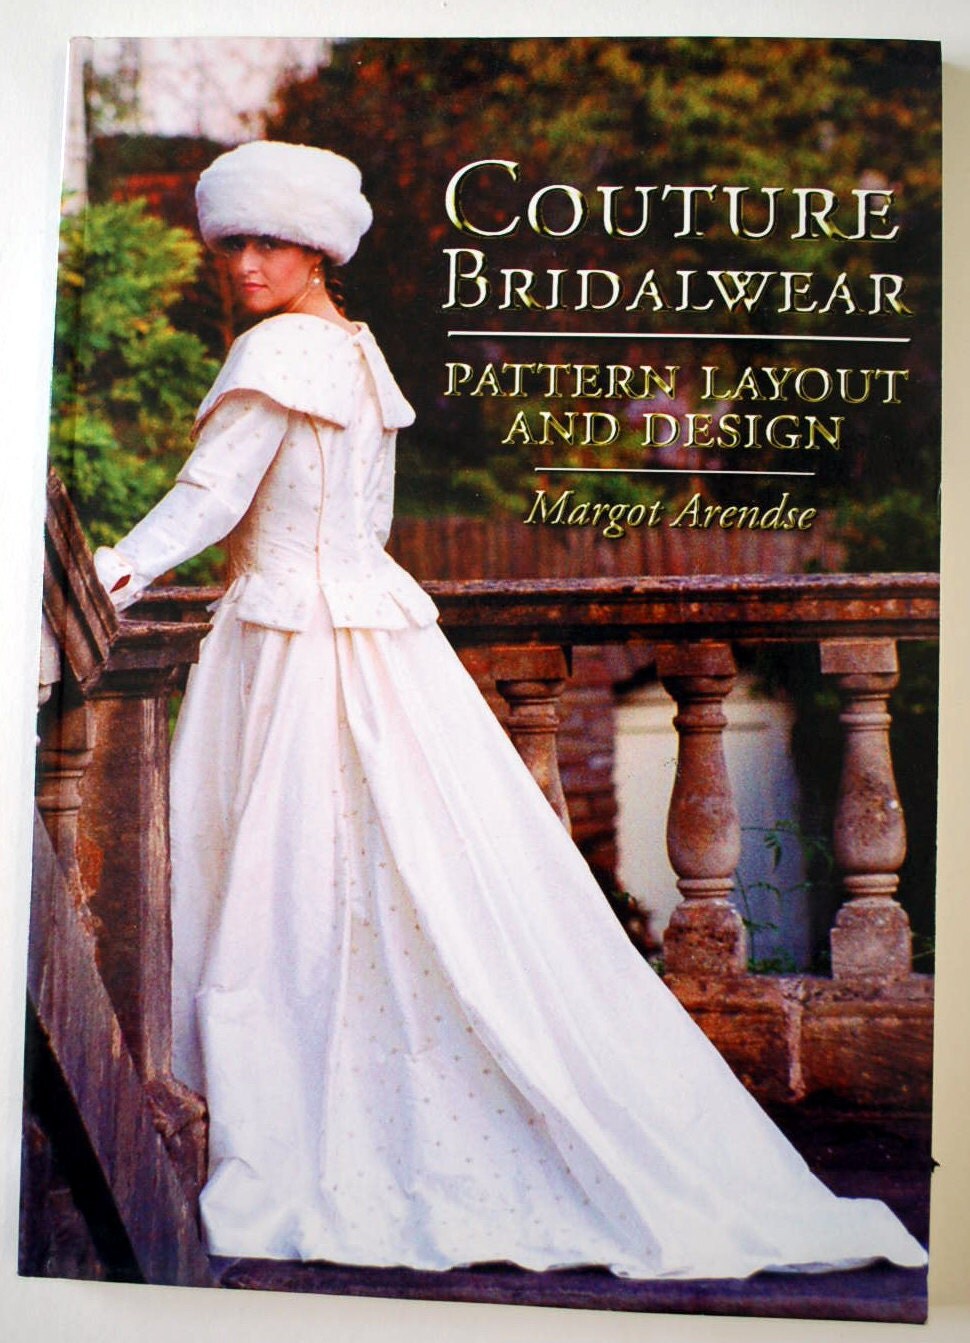 Couture Bridalwear: Pattern Layout and Design Margot Arendse